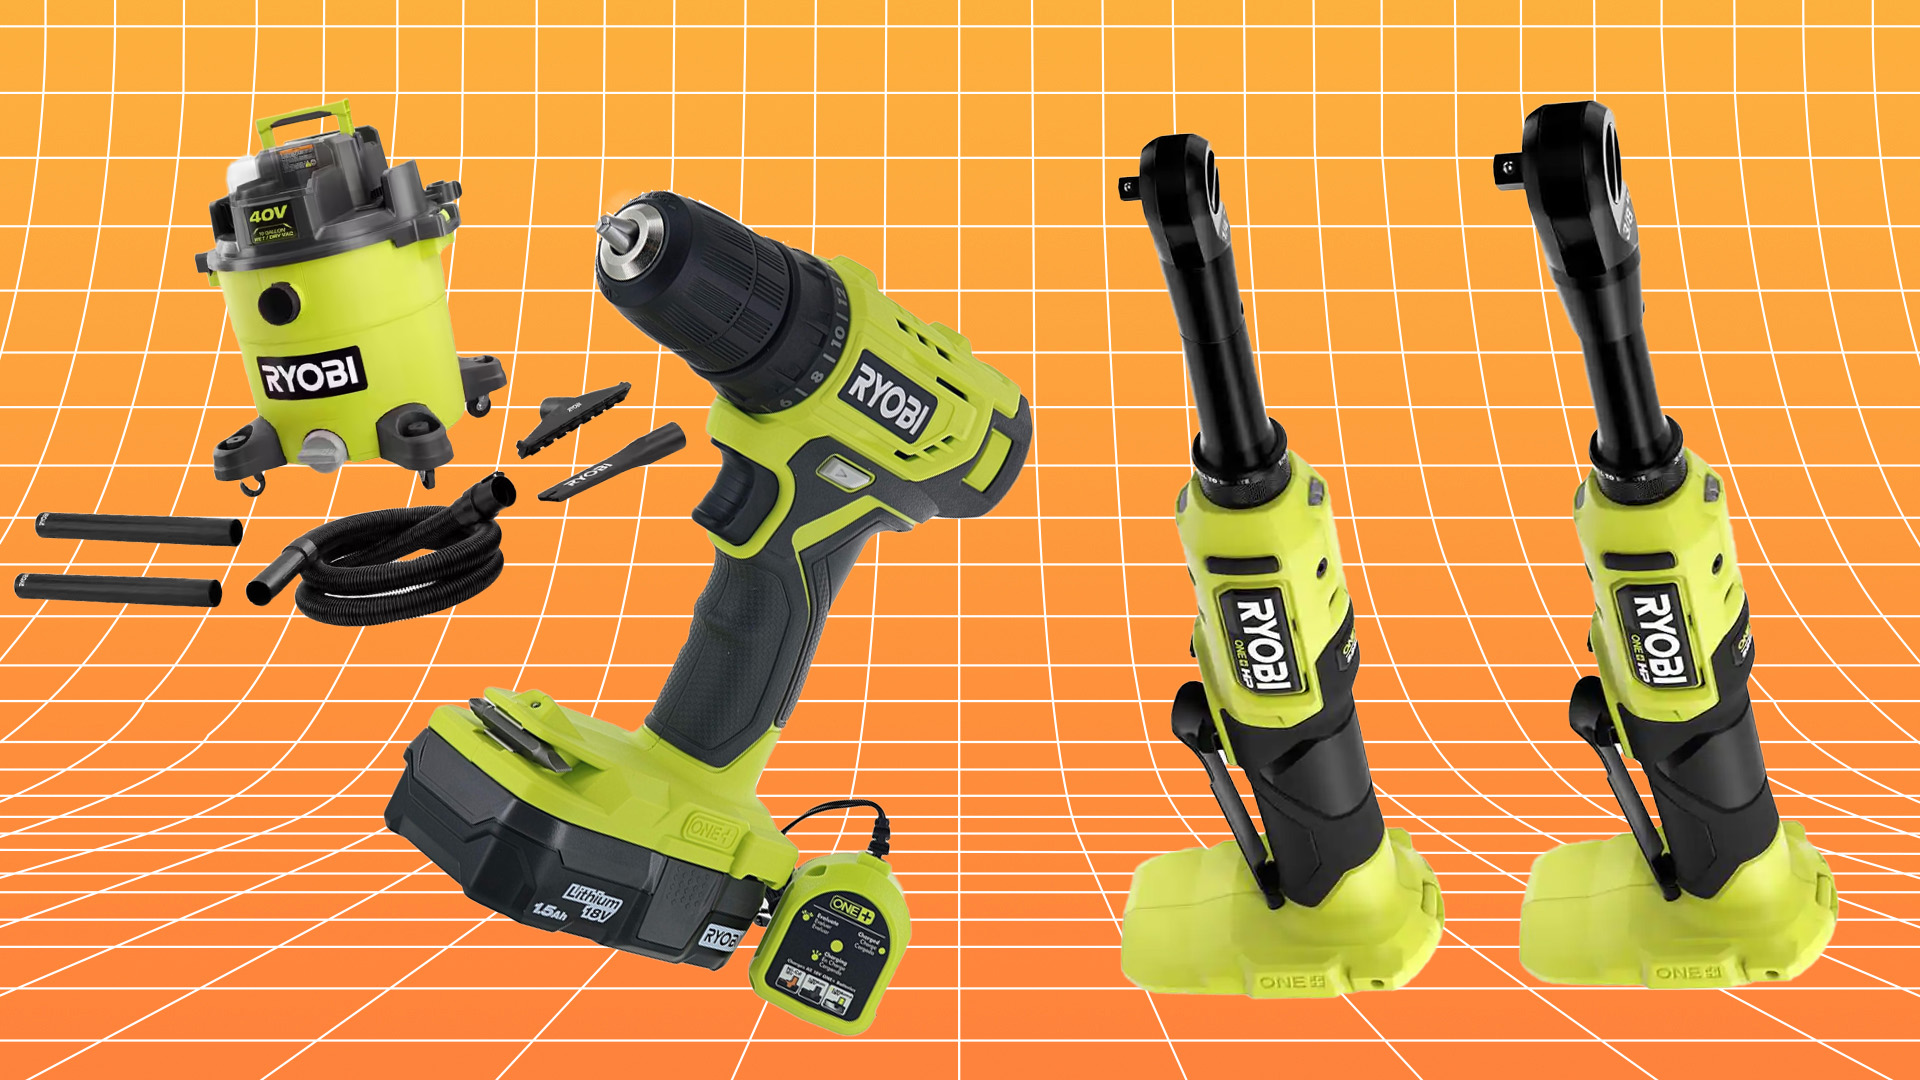 2023 Cyber Monday Deals on Ryobi Tools Are Still Going Strong